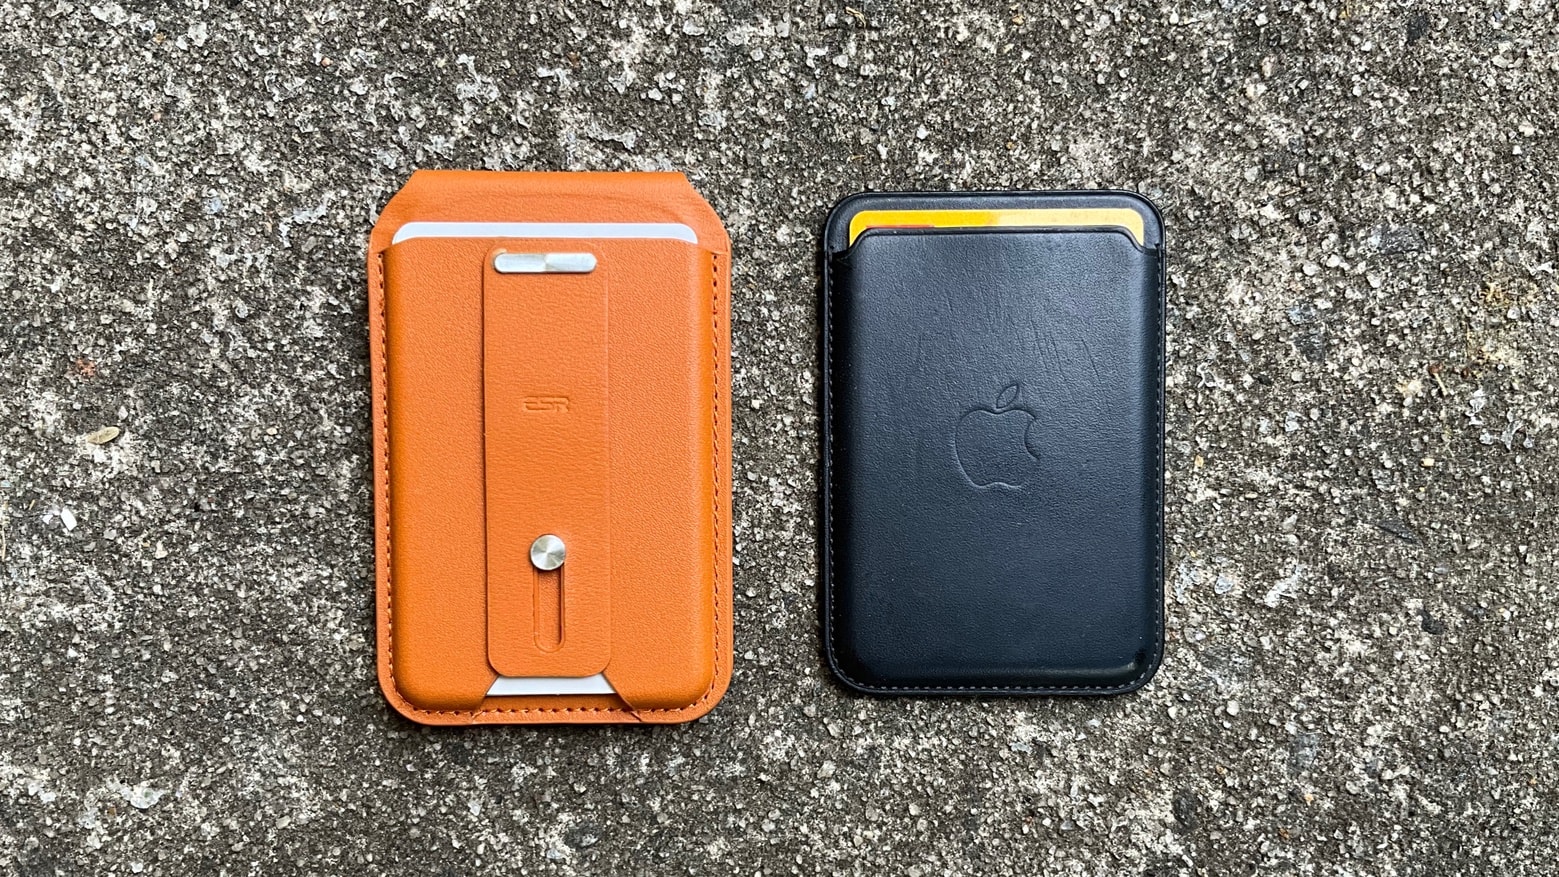 ESR HaloLock Geo Wallet Stand review: iPhone wallet you won't lose